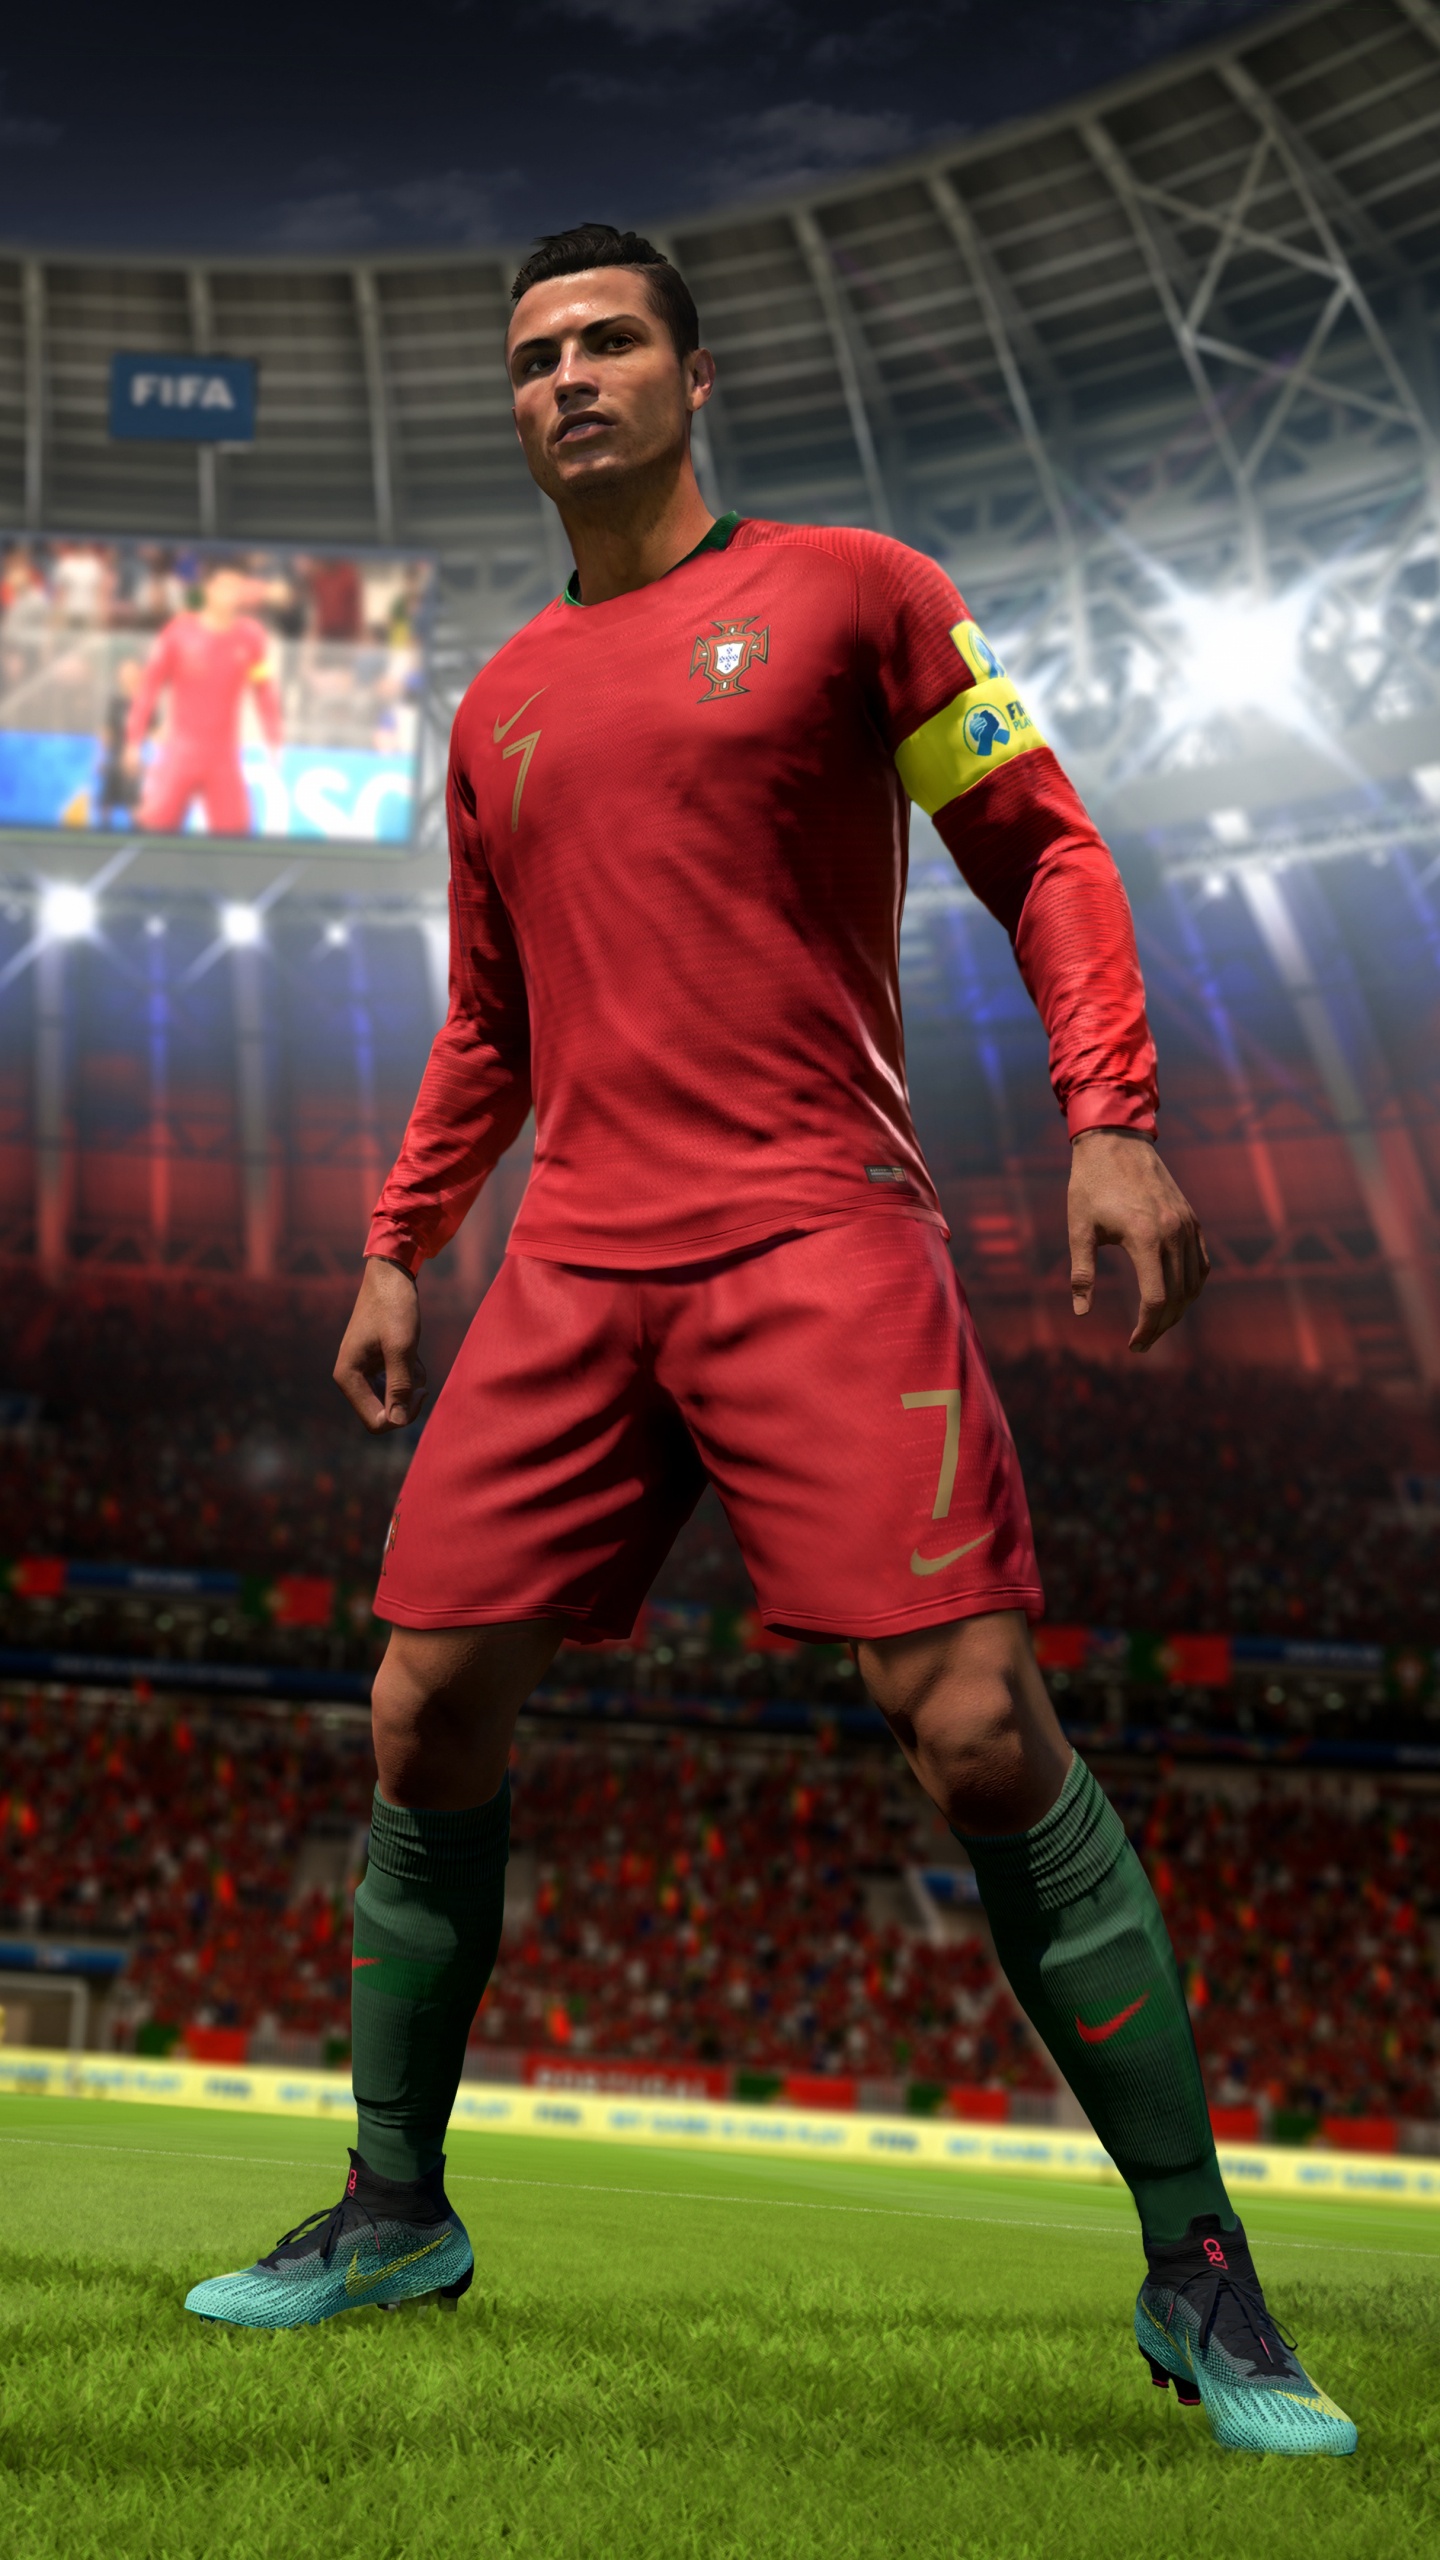 Fifa 18, 2018 World Cup, ea Sports, Electronic Arts, Playstation 4. Wallpaper in 1440x2560 Resolution